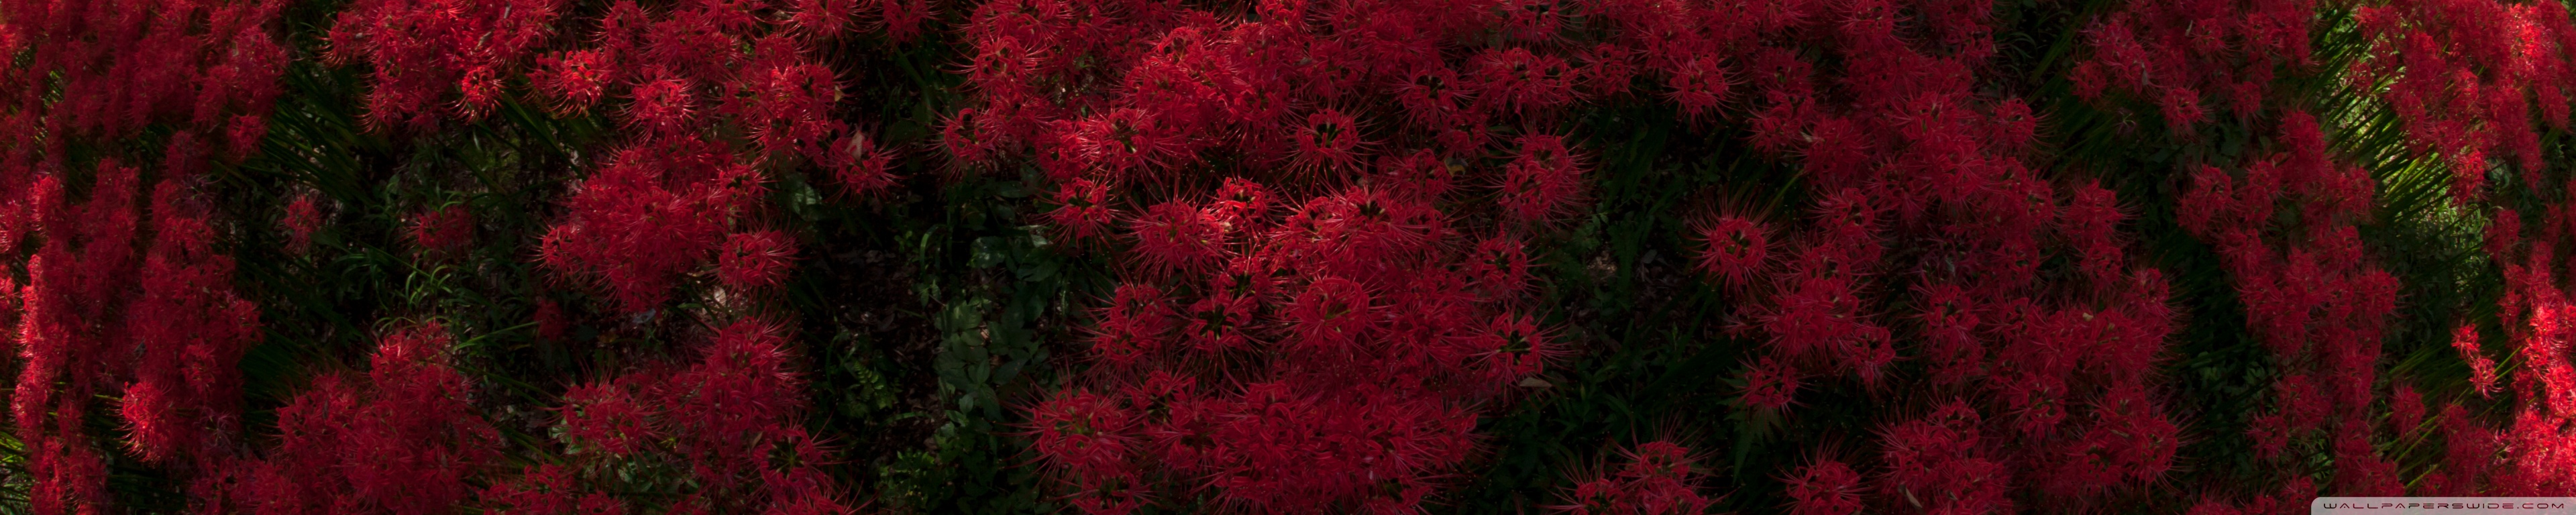 Red Spider Lilies Blooming By Trees Ultra HD Desktop Background ...